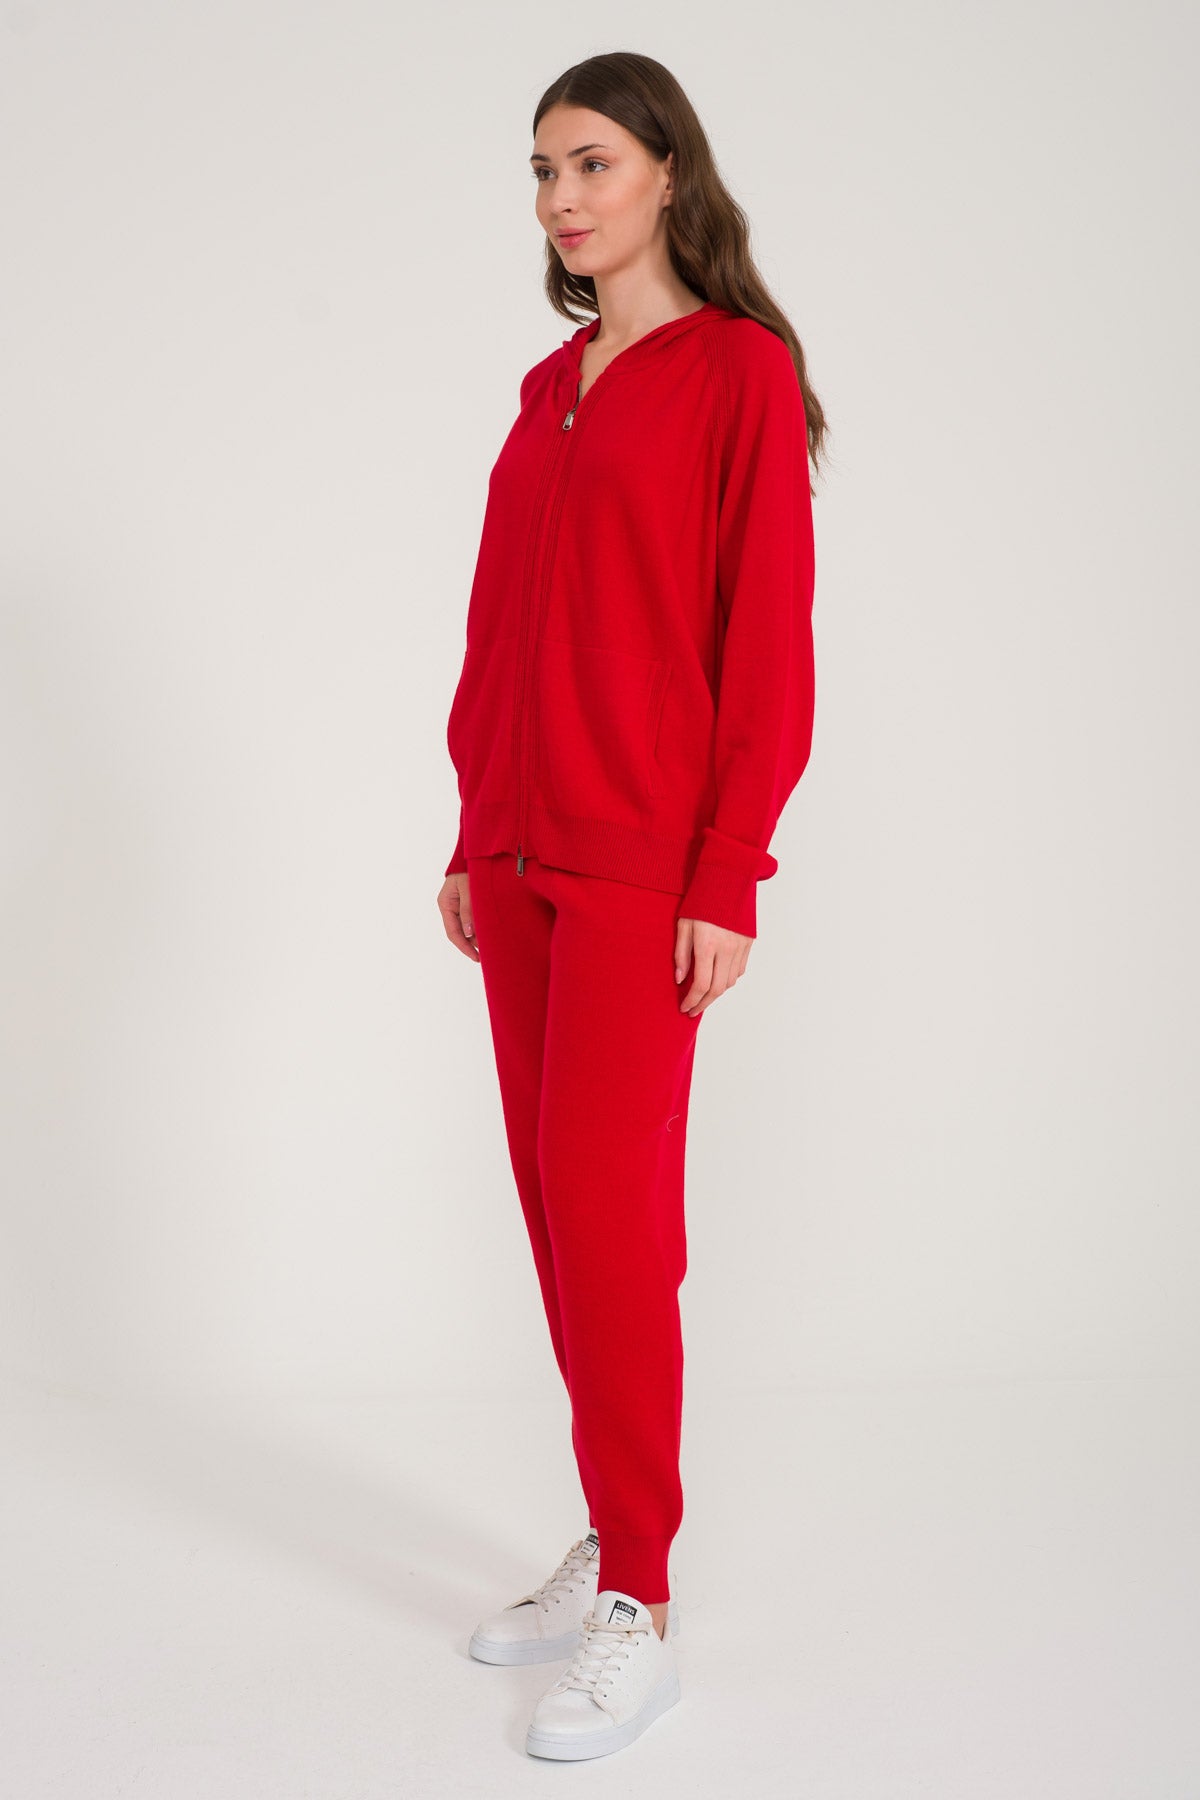 Red Knit Sweater & Pants Set